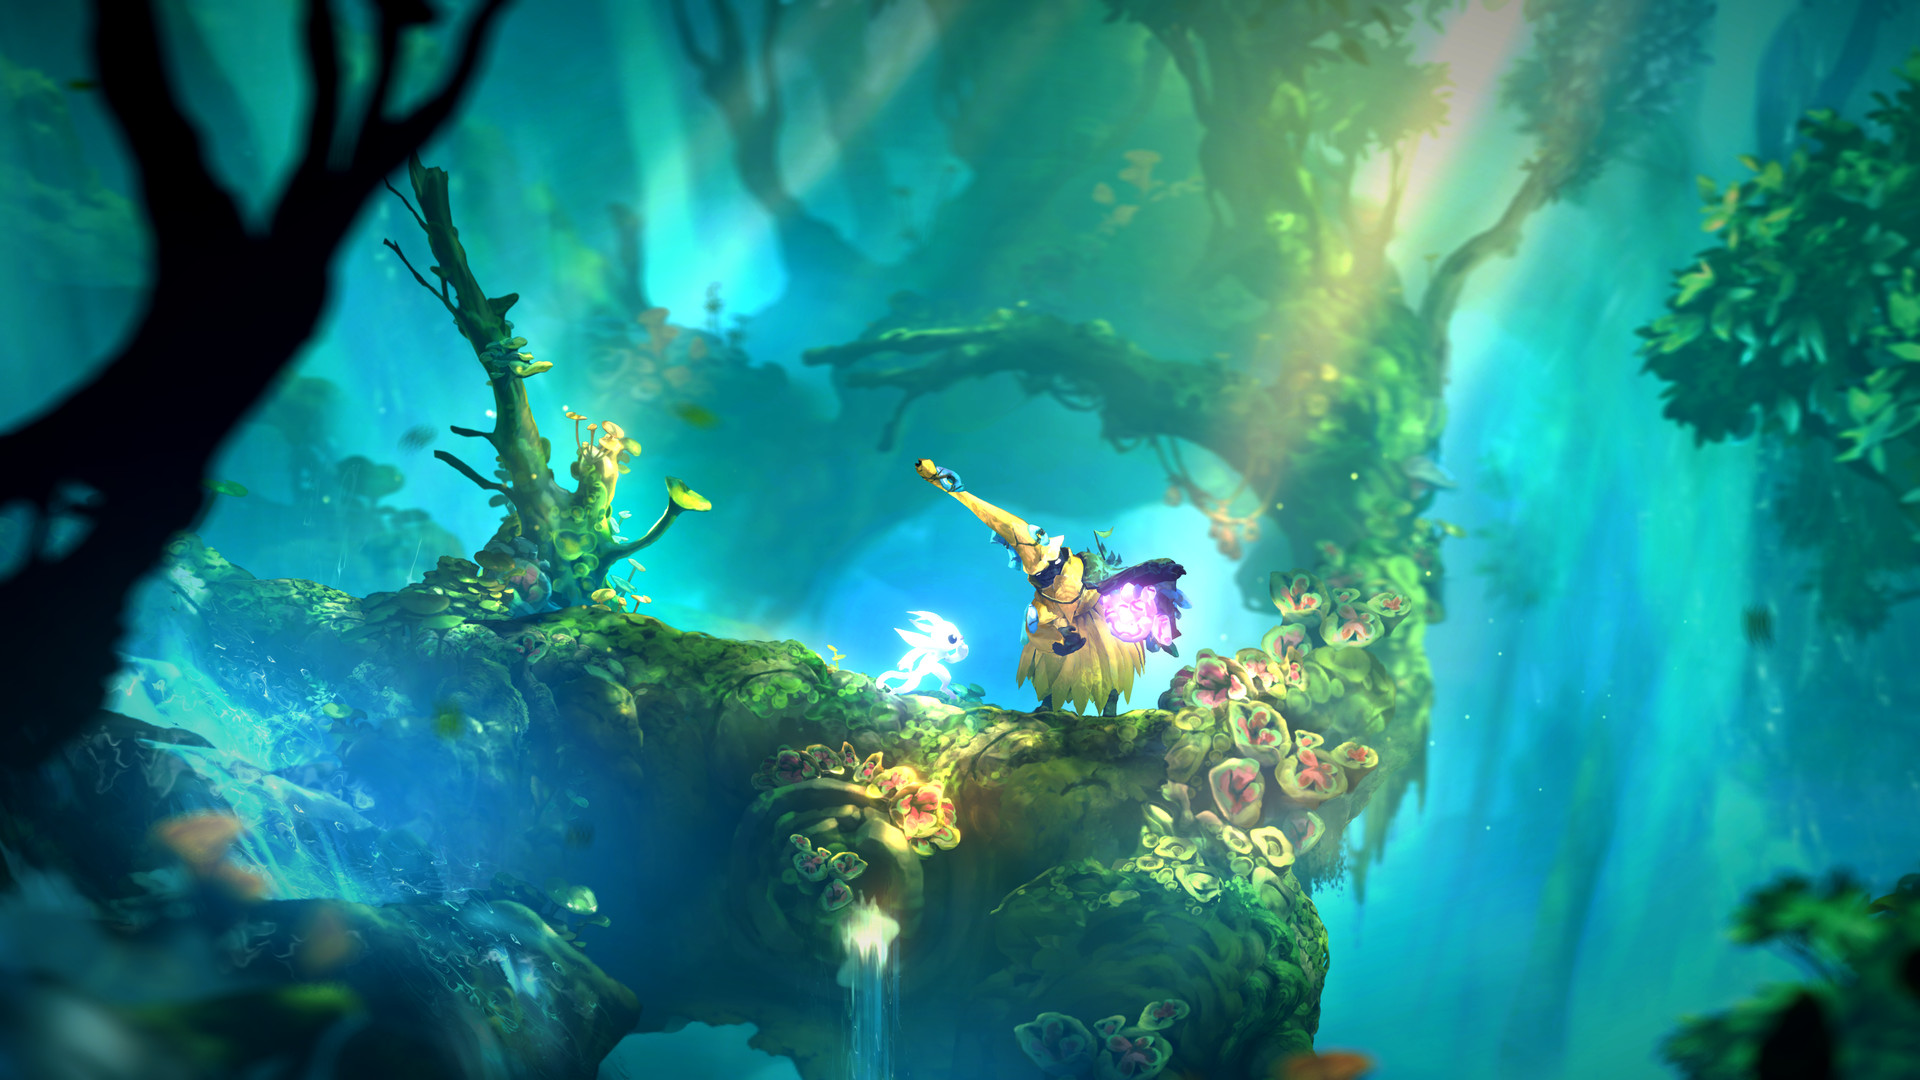 ✅ Ori and the Will of the Wisps XBOX ONE / WIN10 KEY 🔑